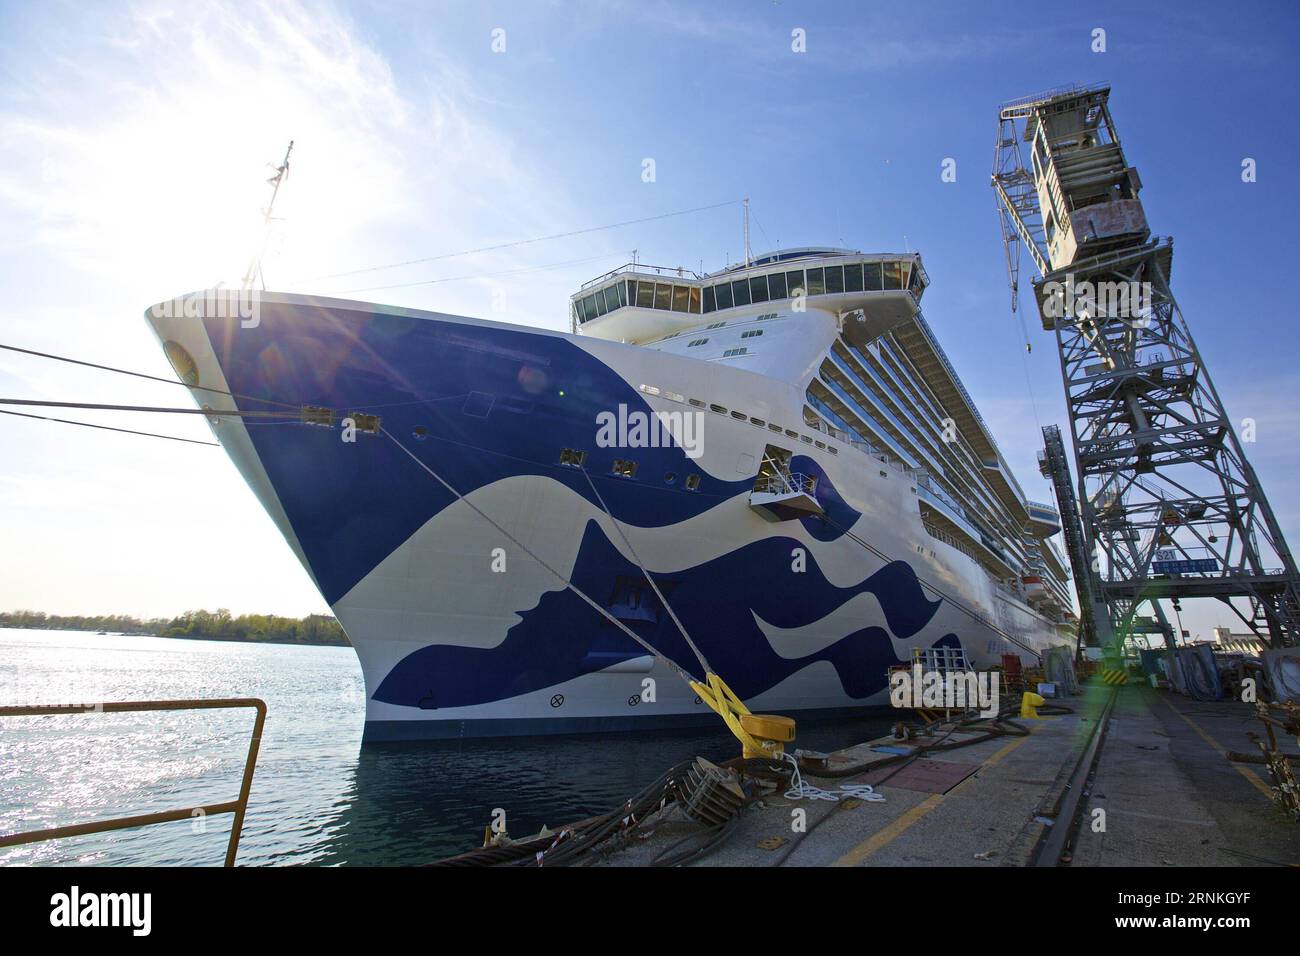 (170331) -- MONFALCONE, March 31, 2017 -- Photo taken on March 30, 2017 shows the luxury cruise ship Majestic Princess at the factory in Monfalcone, Italy. Majestic Princess, an international luxury cruise ship tailored specifically for China s market, will start her inaugural season in Europe on Friday. ) (zf) ITALY-MONFALCONE-CRUISE-MAJESTIC PRINCESS-HANDOVER-SILK ROAD SEA ROUTE JinxYu PUBLICATIONxNOTxINxCHN   Monfalcone March 31 2017 Photo Taken ON March 30 2017 Shows The Luxury Cruise Ship Majestic Princess AT The Factory in Monfalcone Italy Majestic Princess to International Luxury Cruise Stock Photo